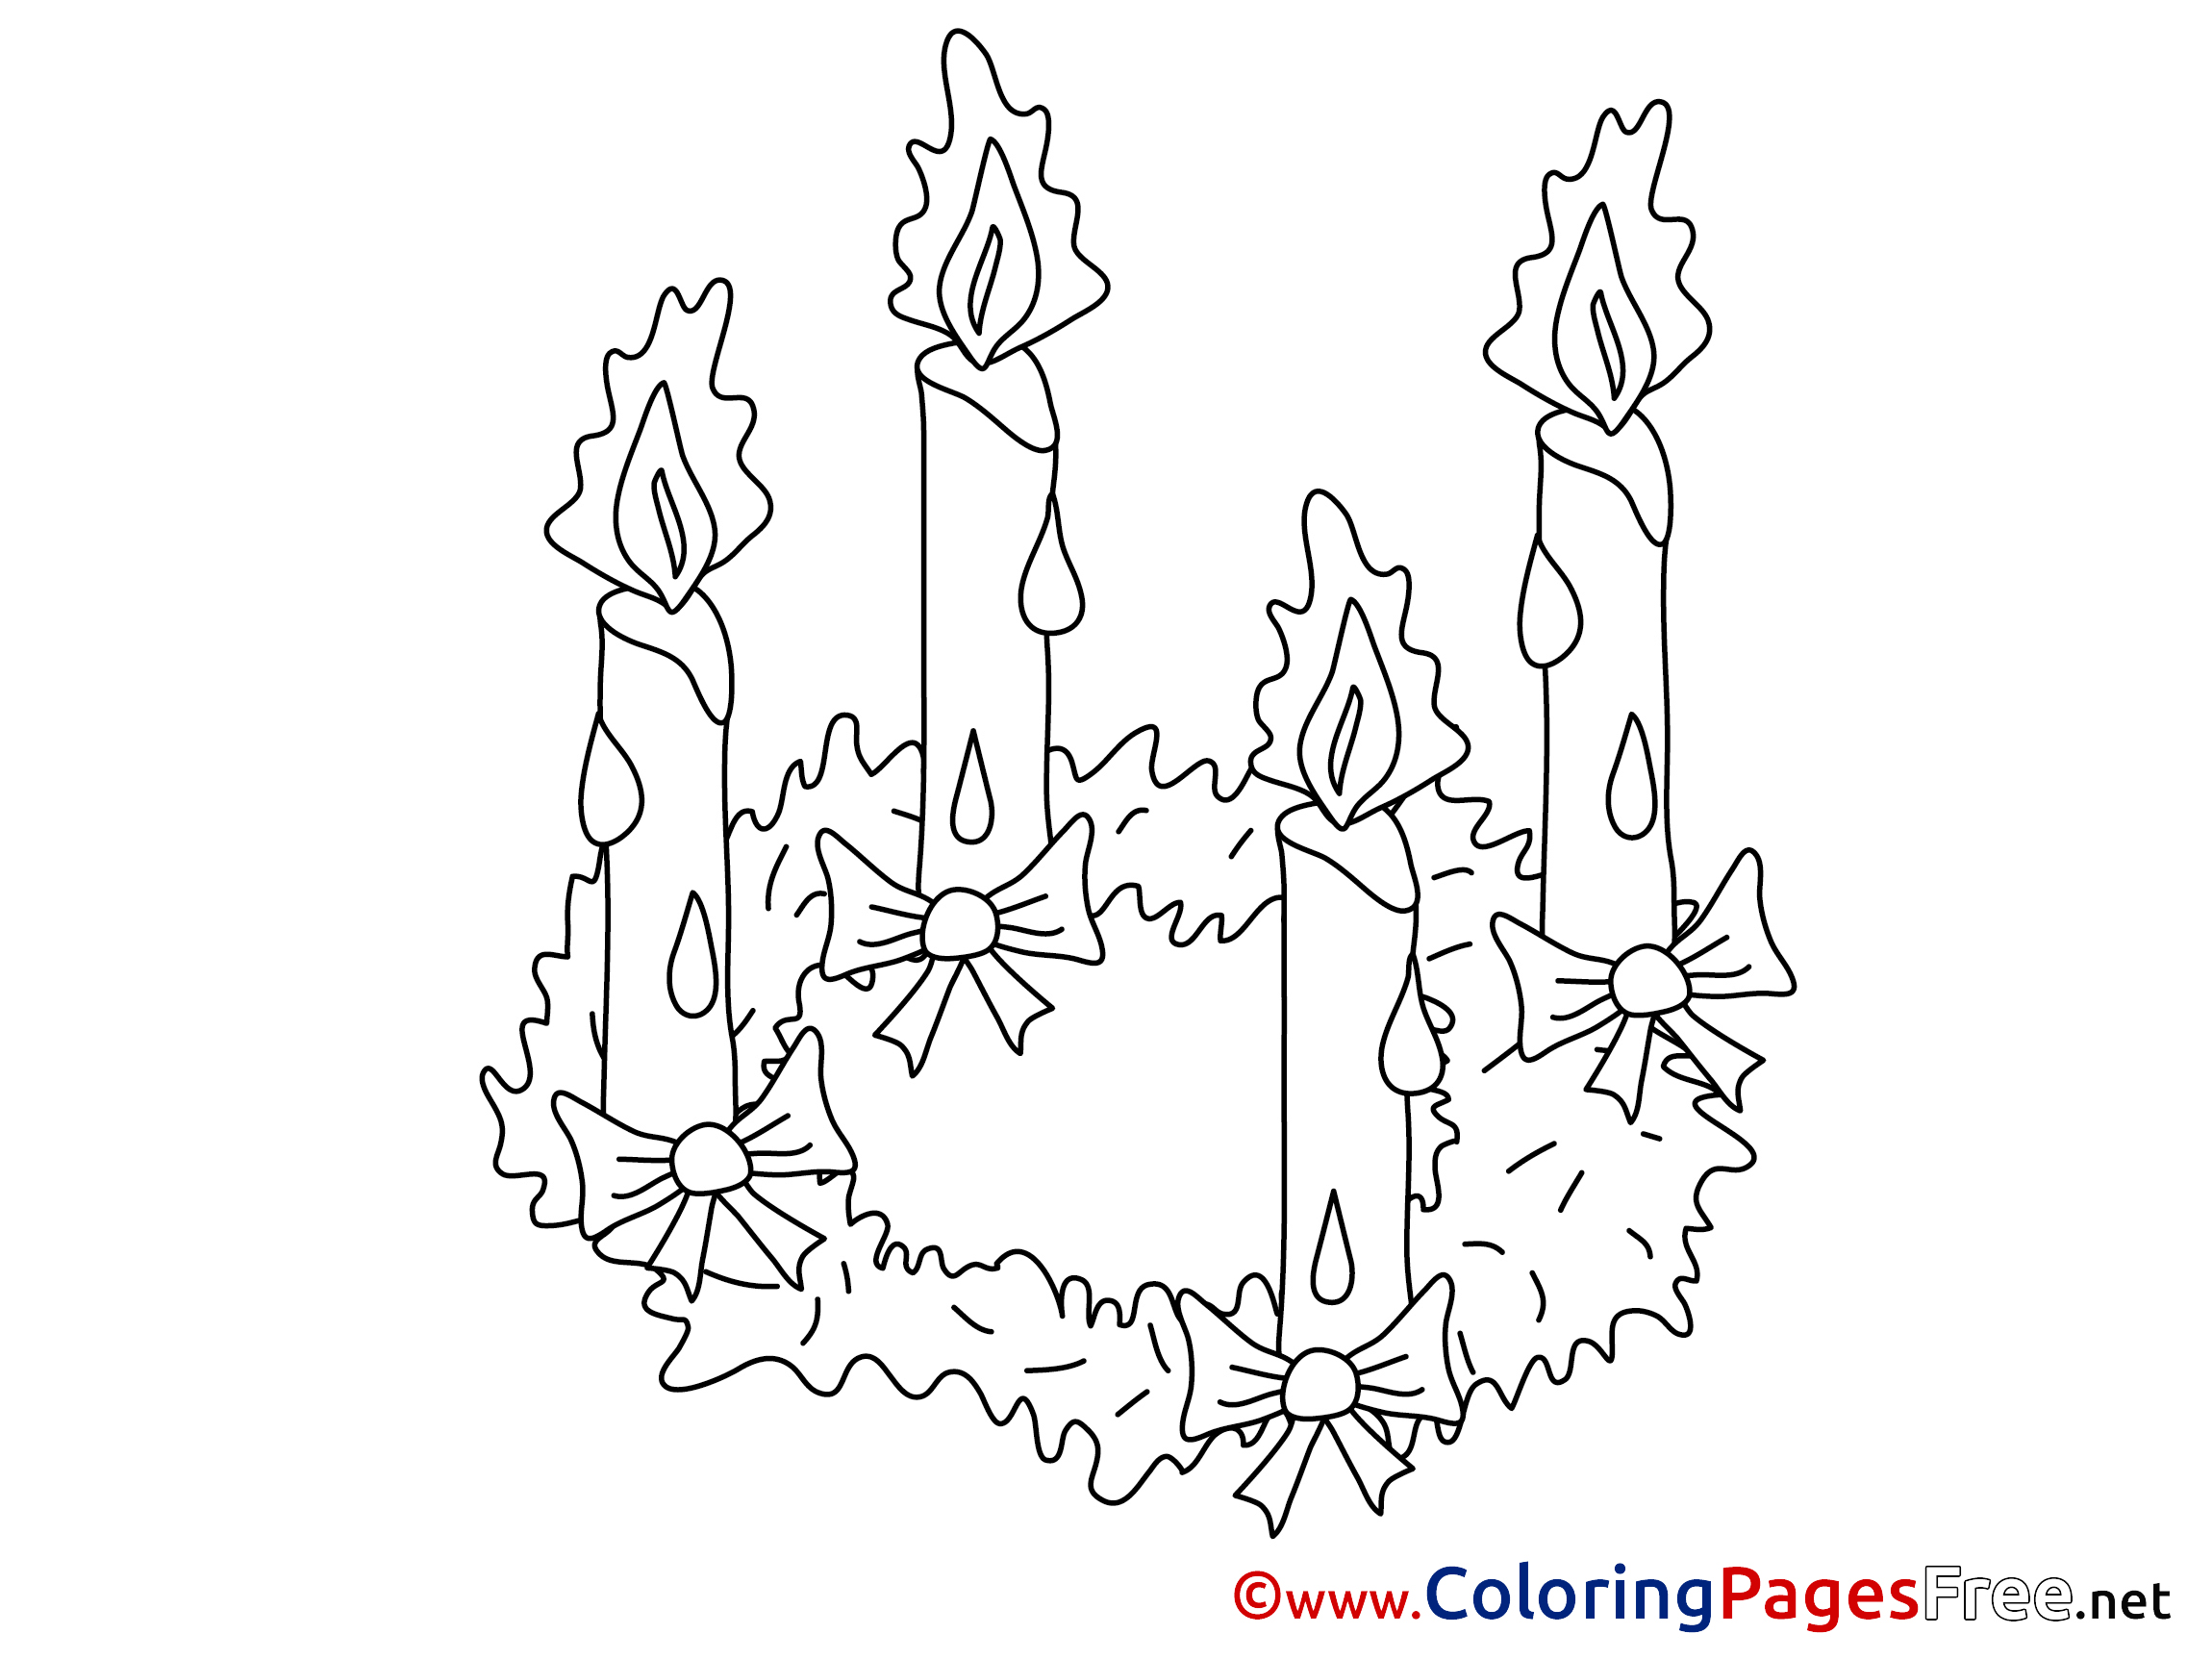 Download Flame Candle Coloring Pages Advent for free